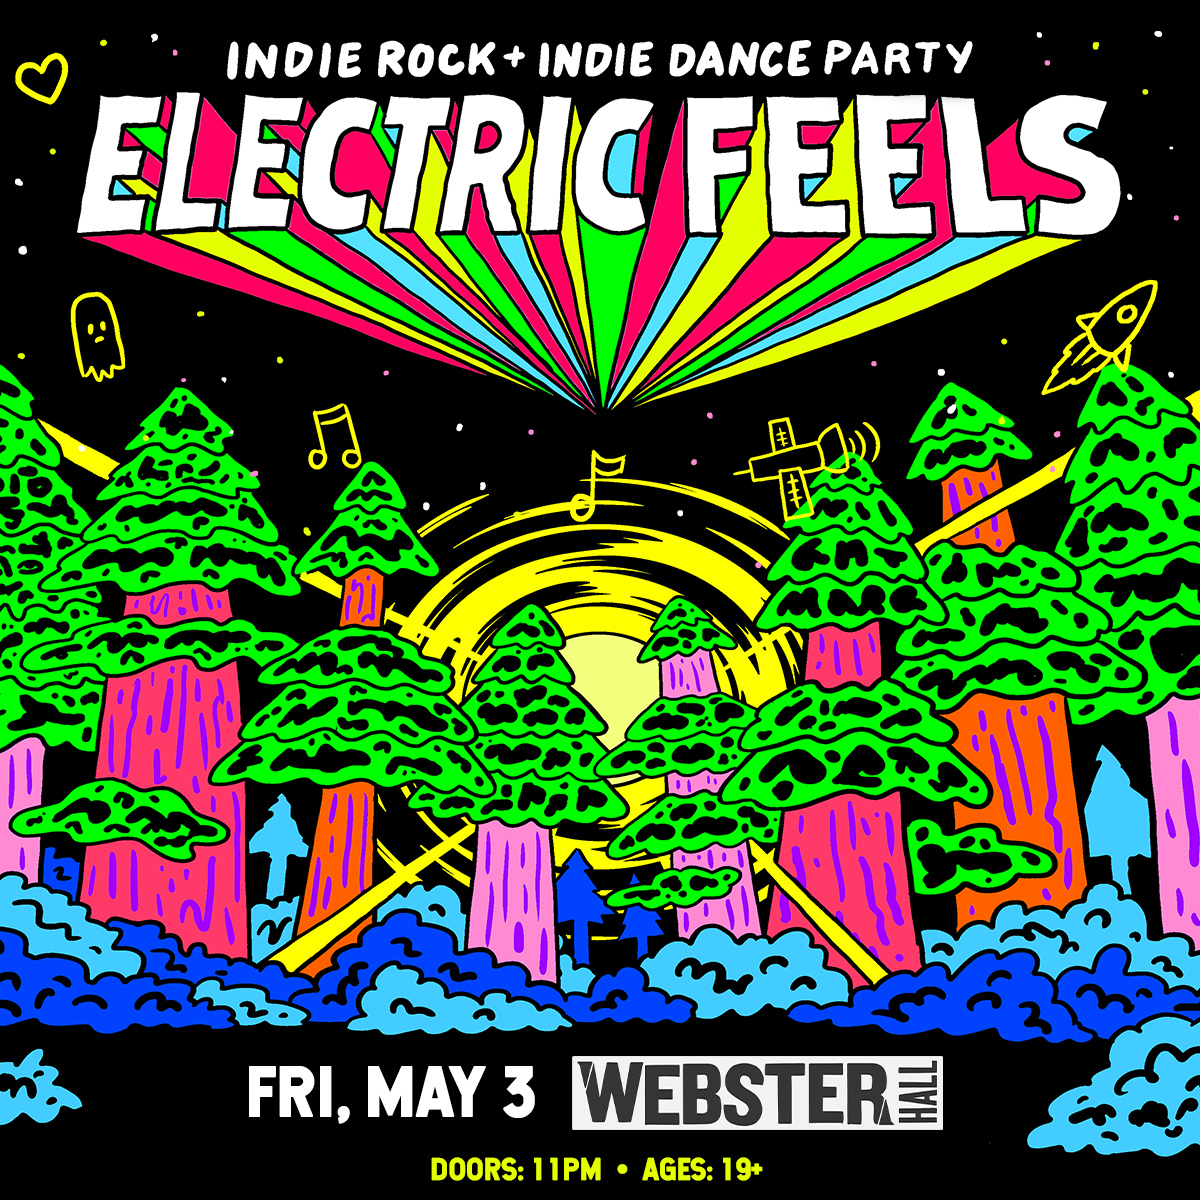 JUST ANNOUNCED: Electric Feels is coming back to Webster Hall on fri, may 3 🎵 tickets go on sale Friday at 12pm